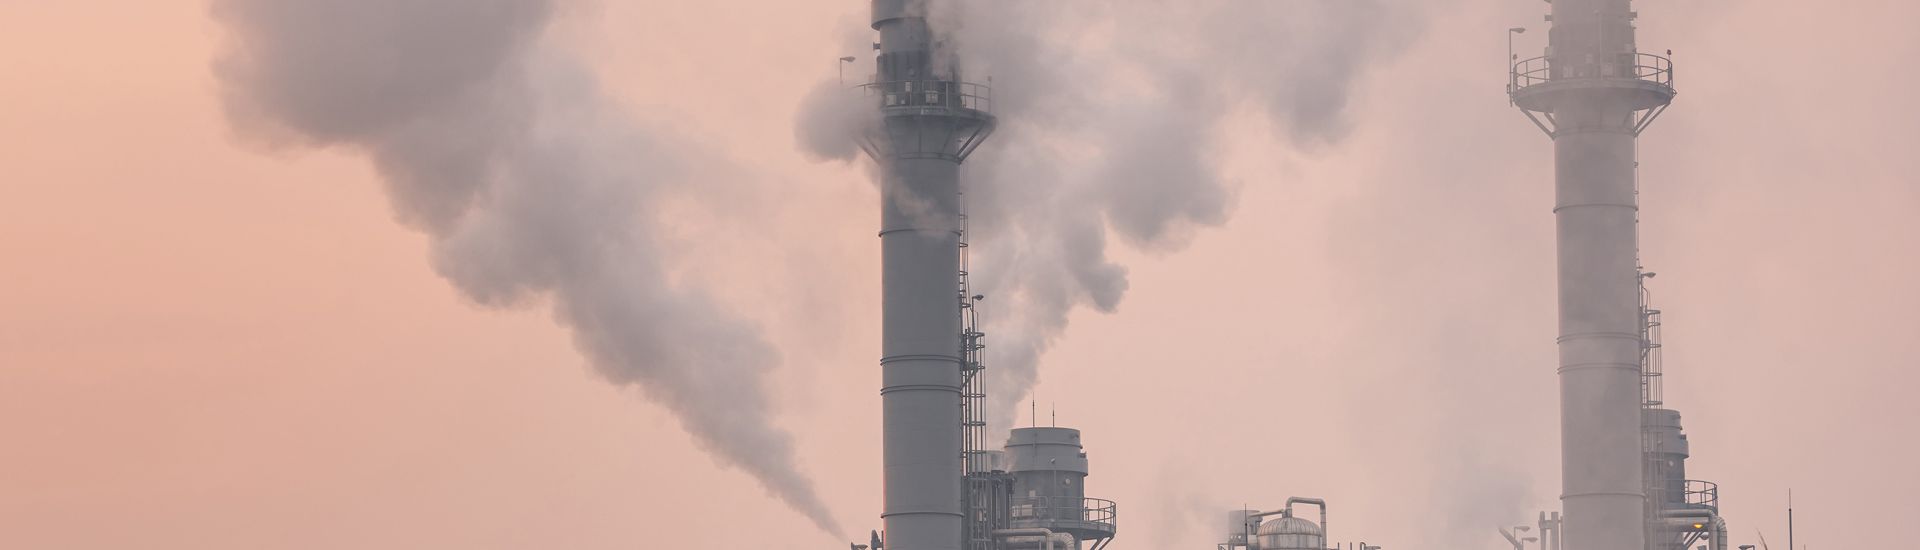 Factory with plumes of smoke coming out of the top, against a hazy pink sky.